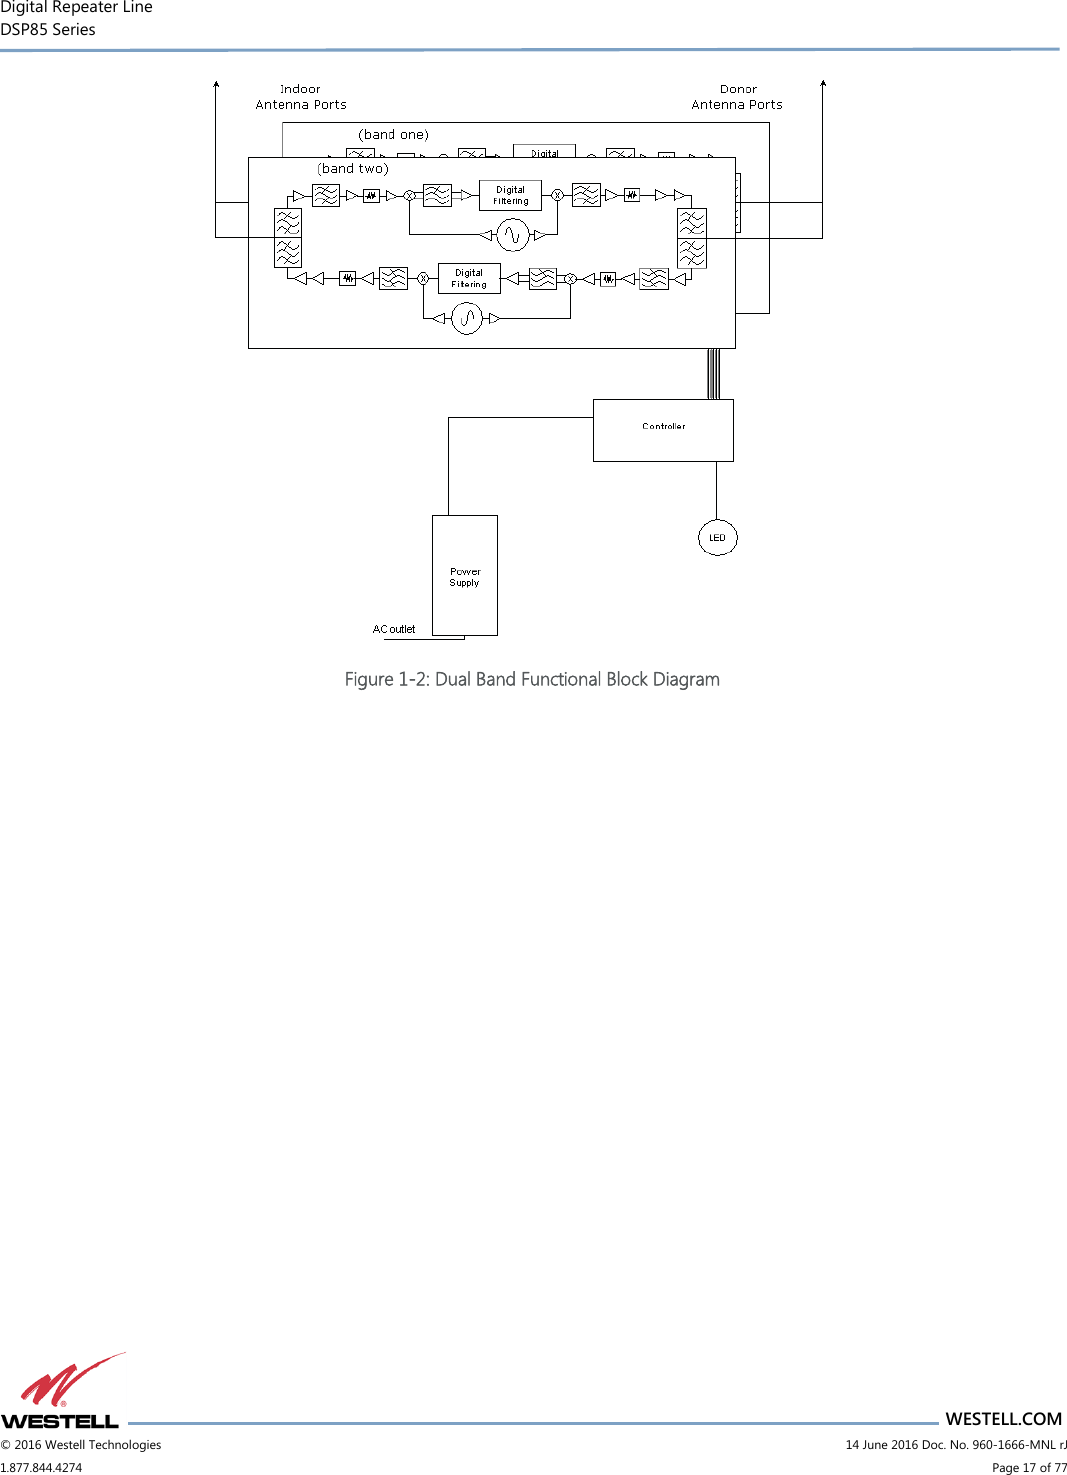 Digital Repeater Line DSP85 Series                       WESTELL.COM © 2016 Westell Technologies                         14 June 2016 Doc. No. 960-1666-MNL rJ 1.877.844.4274                             Page 17 of 77   Figure 1-2: Dual Band Functional Block Diagram  